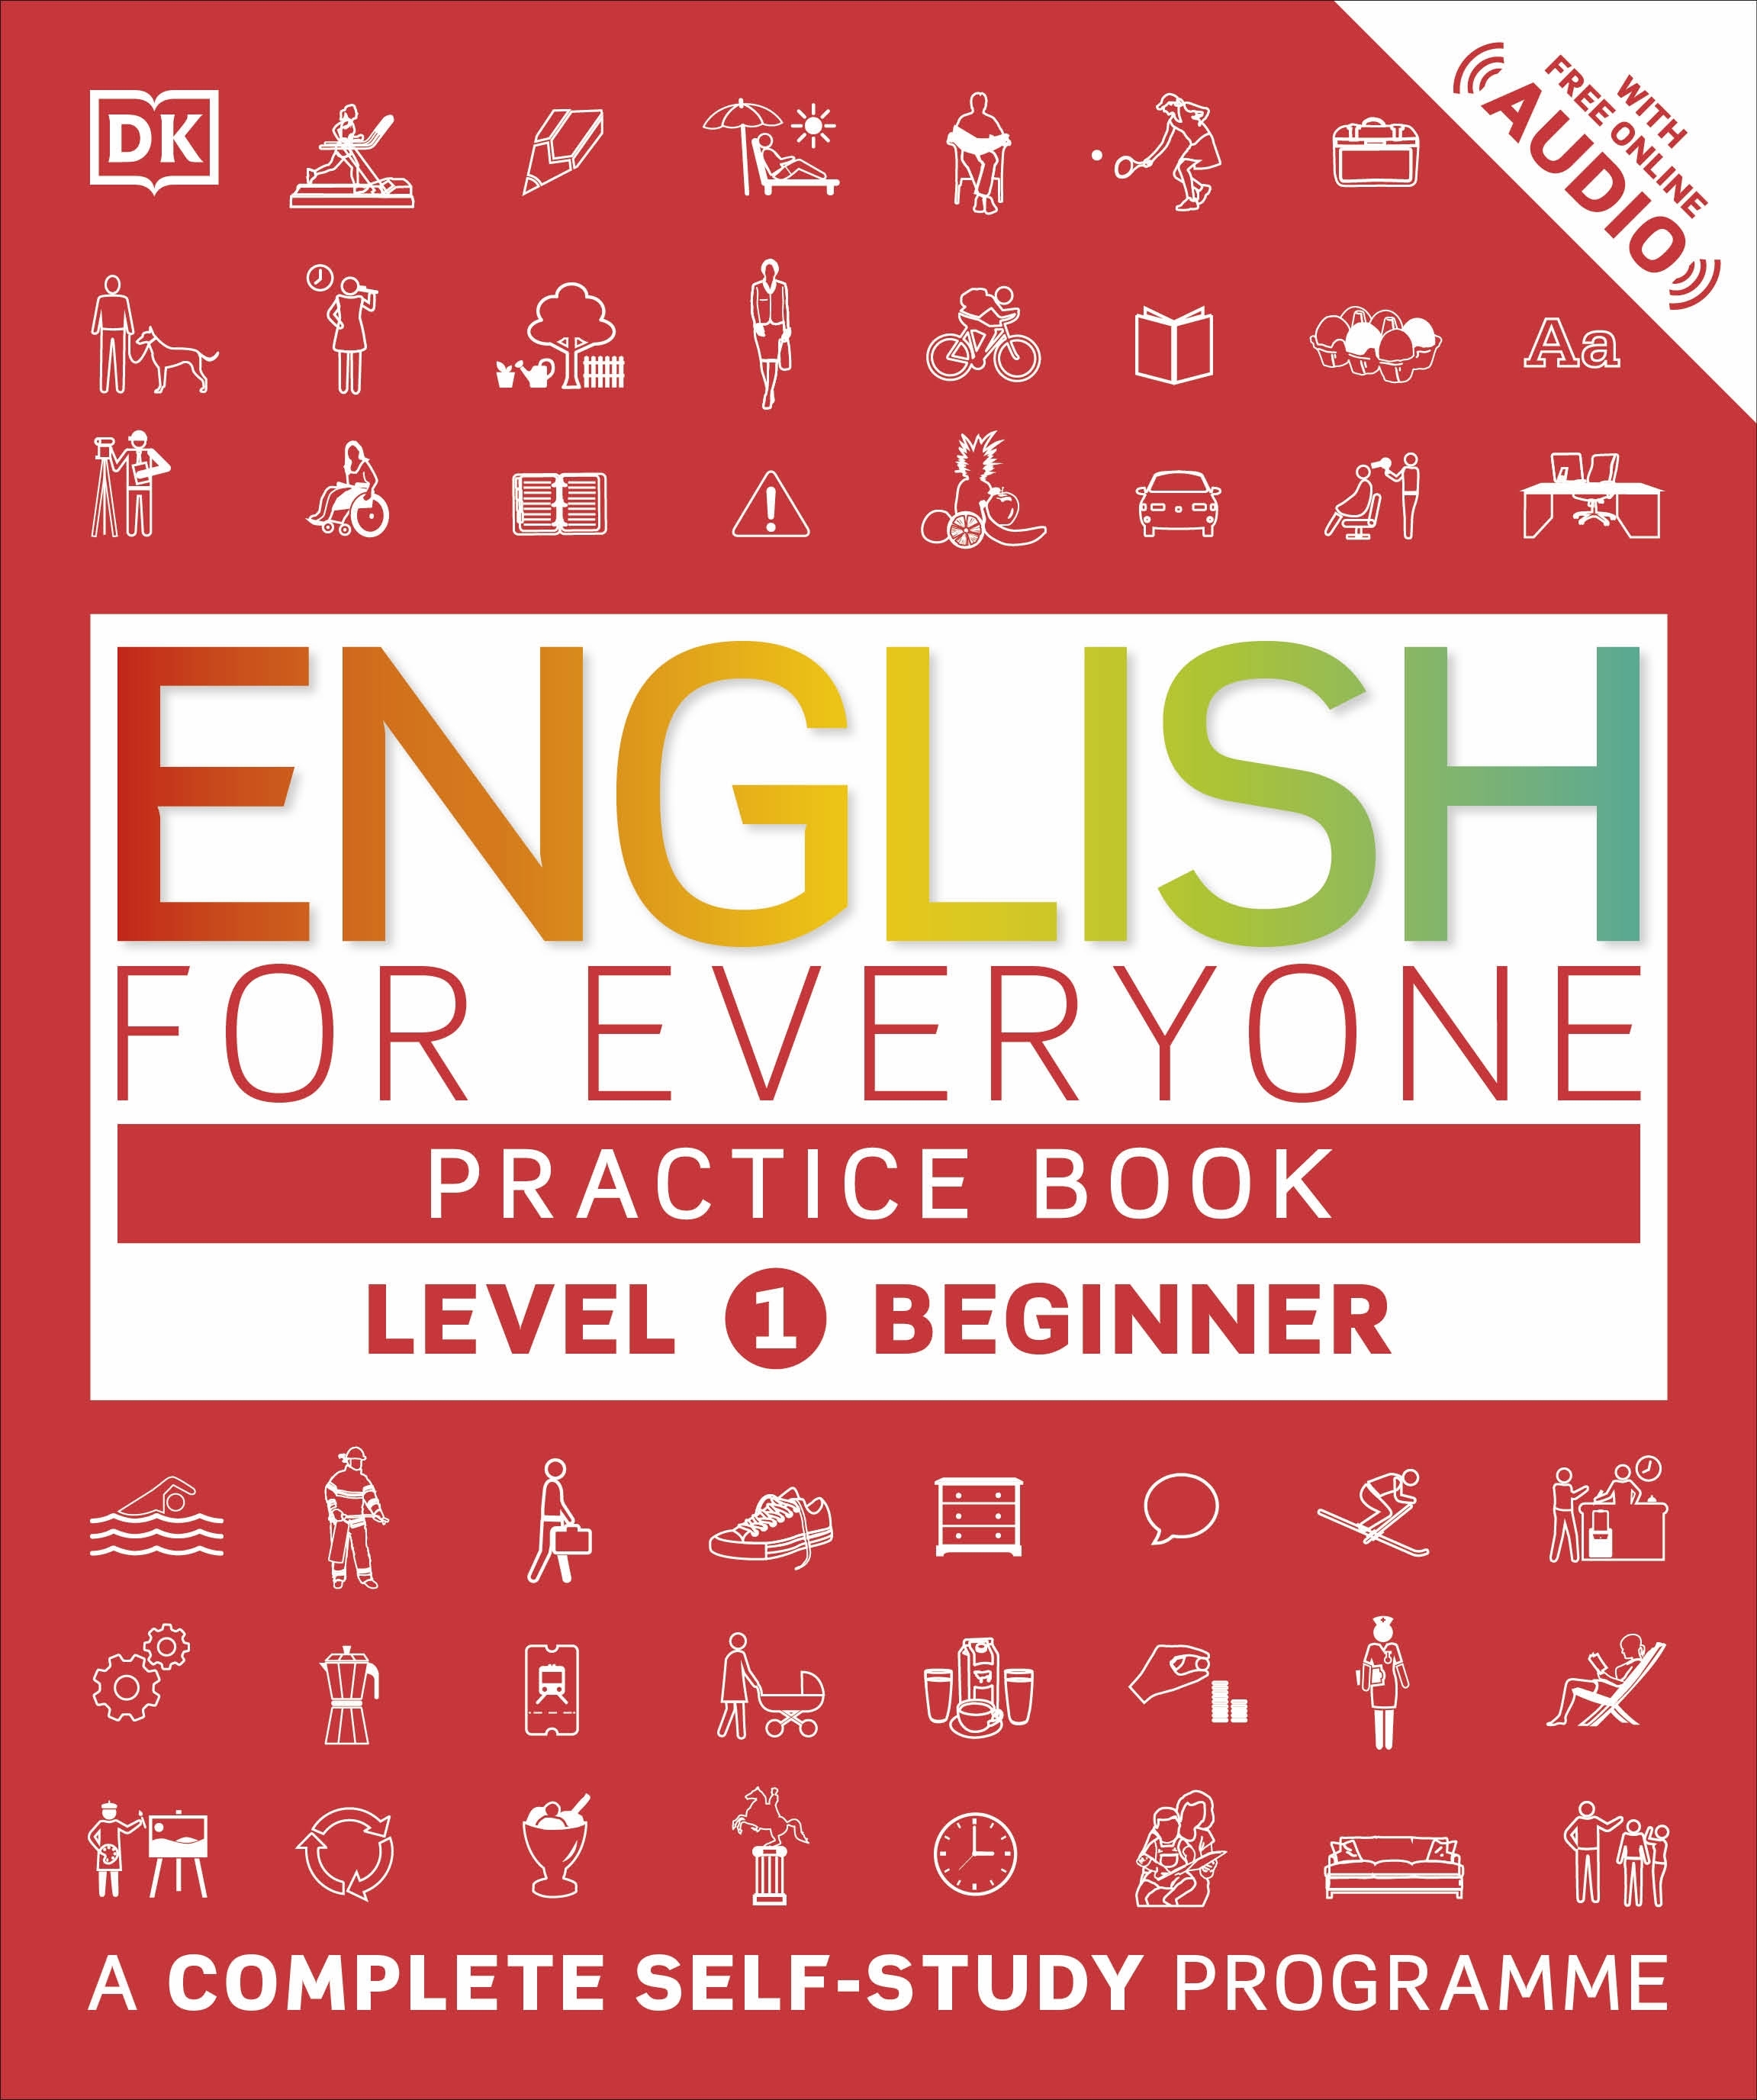 English For Everyone Practice Book Level 1 Beginner By DK Penguin Books New Zealand